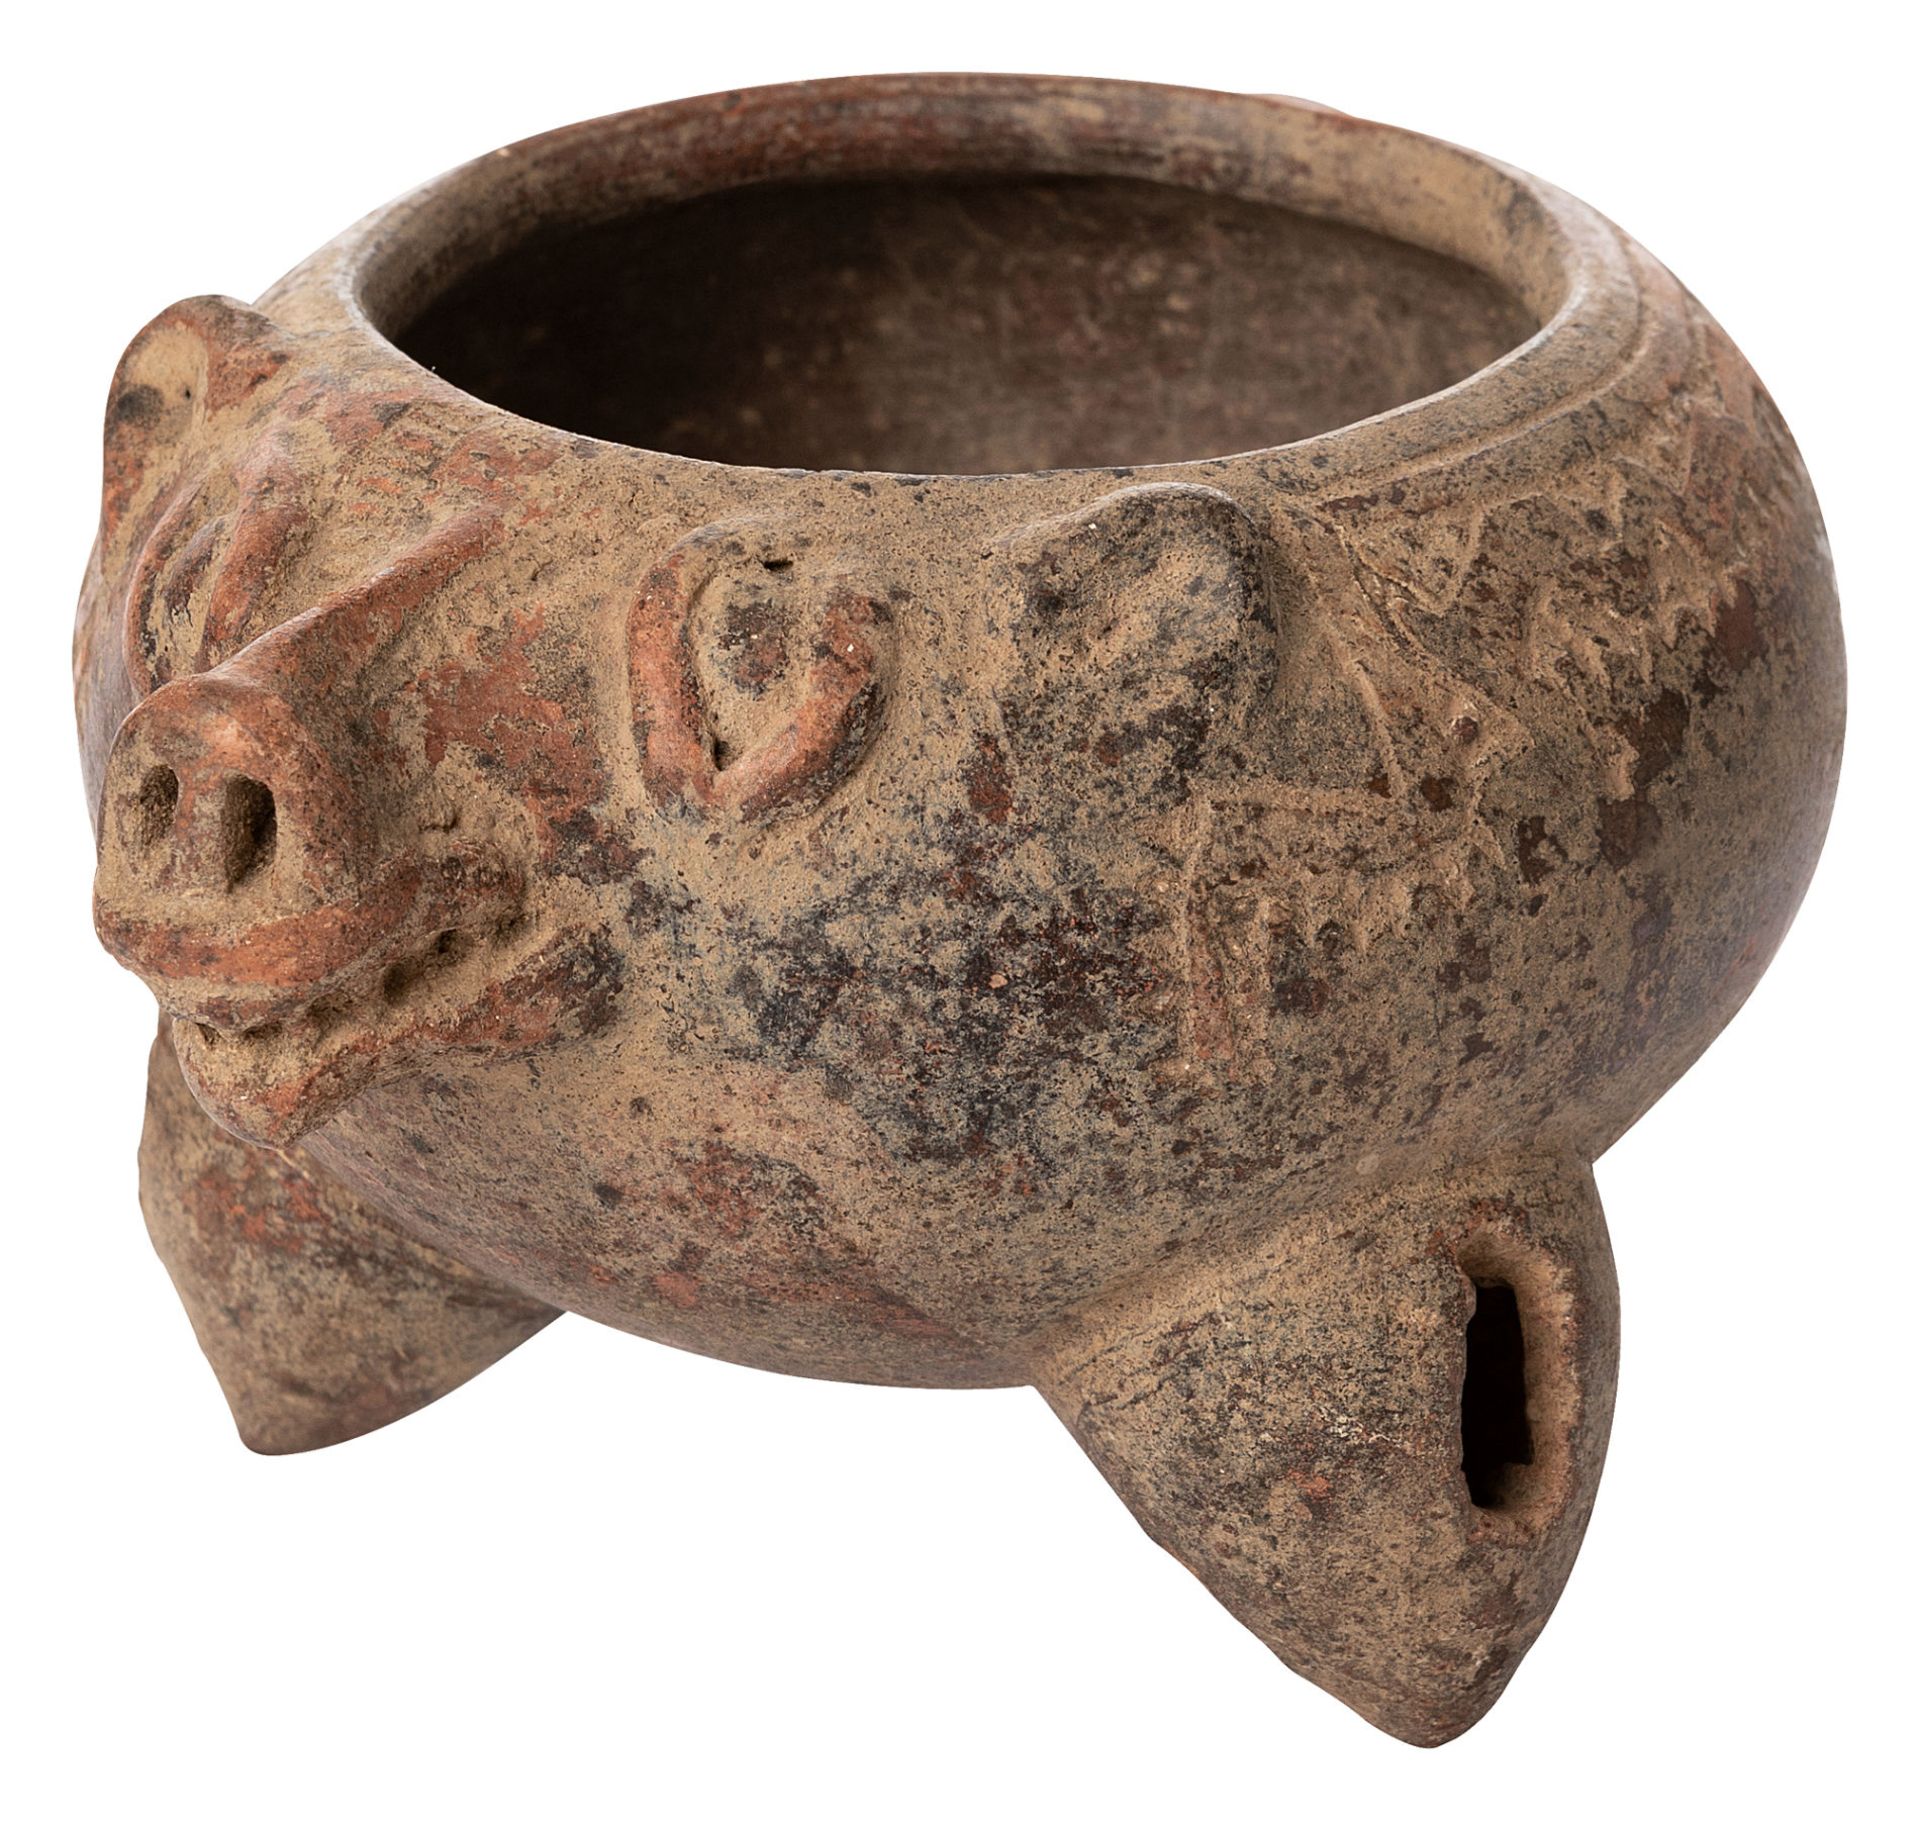 Small rattle bowl with animal face